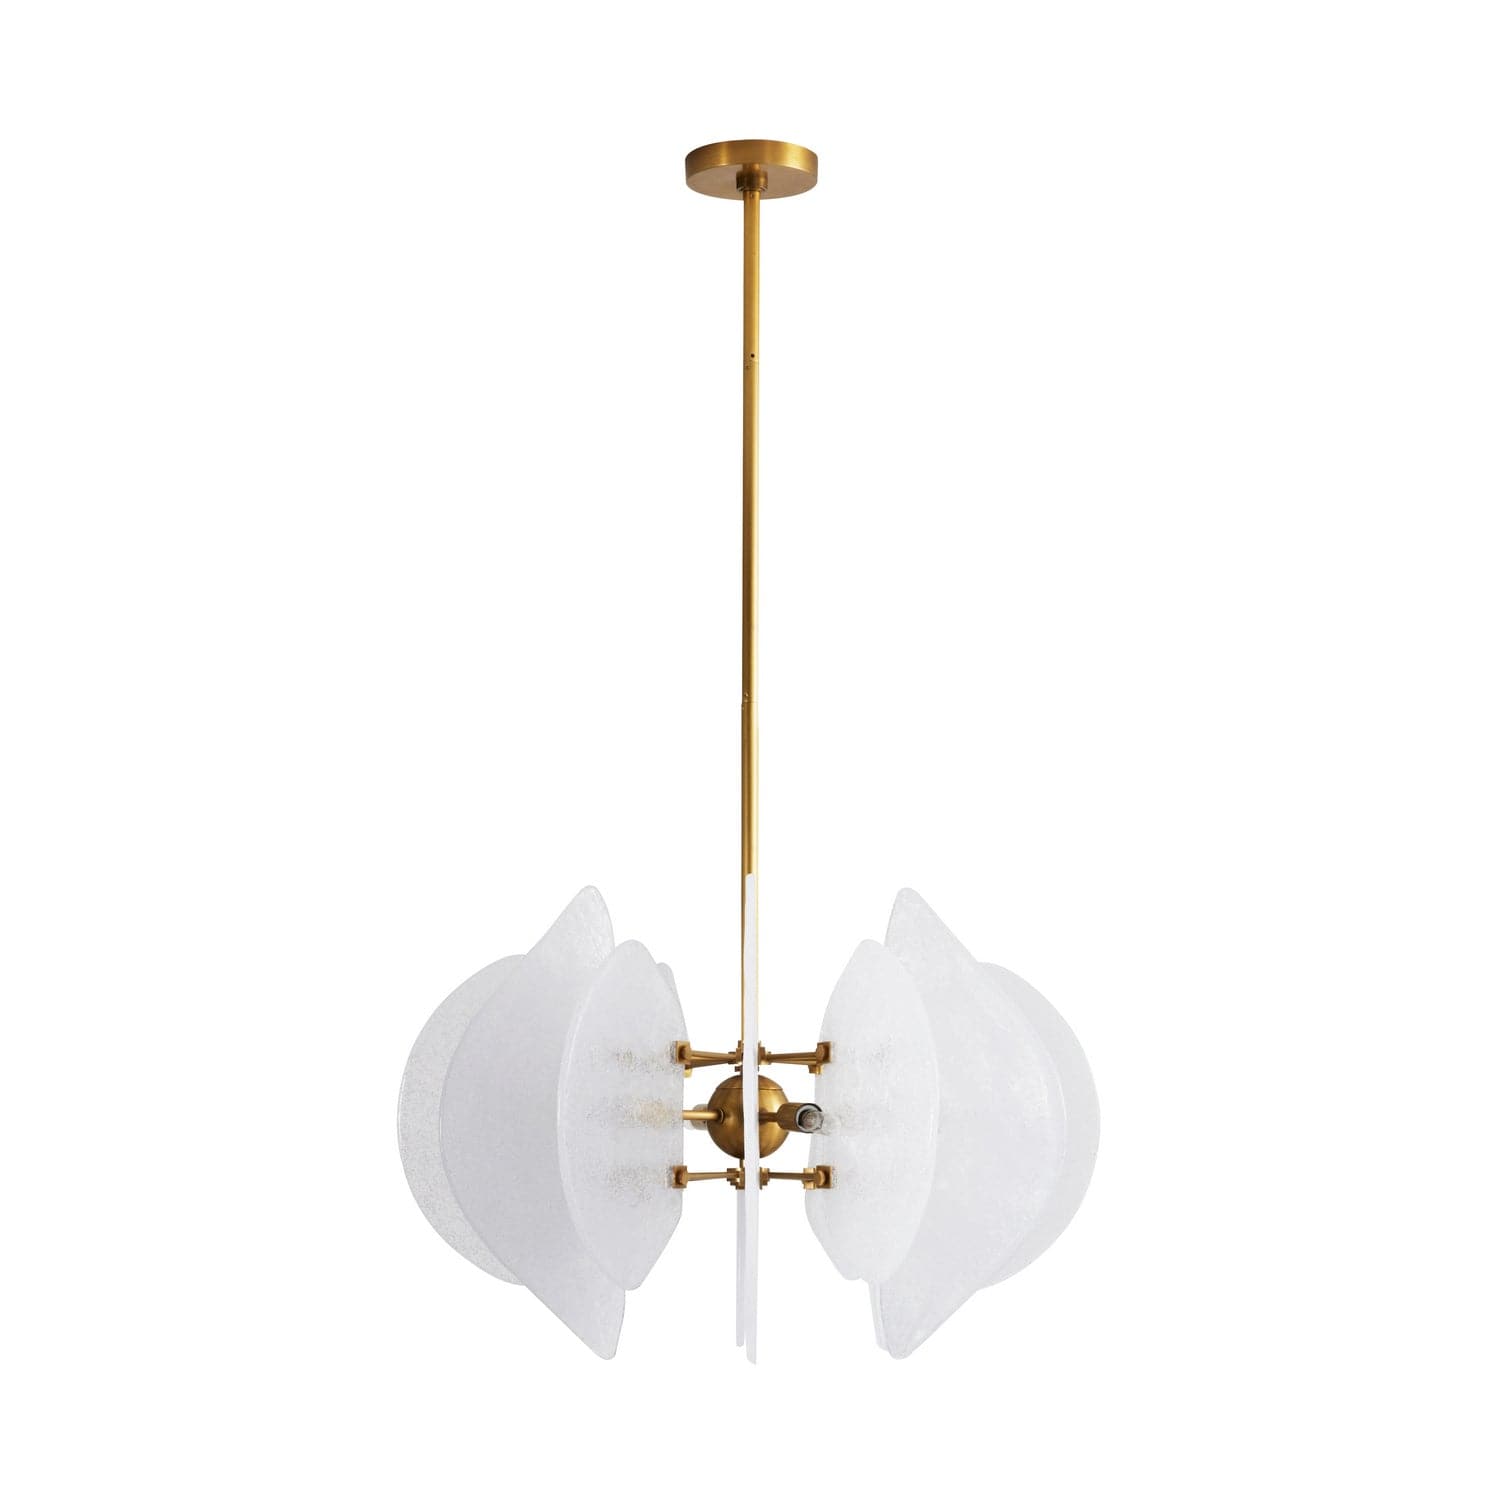 Arteriors - 89063 - Mid. Chandeliers - Glass Down - Kayal